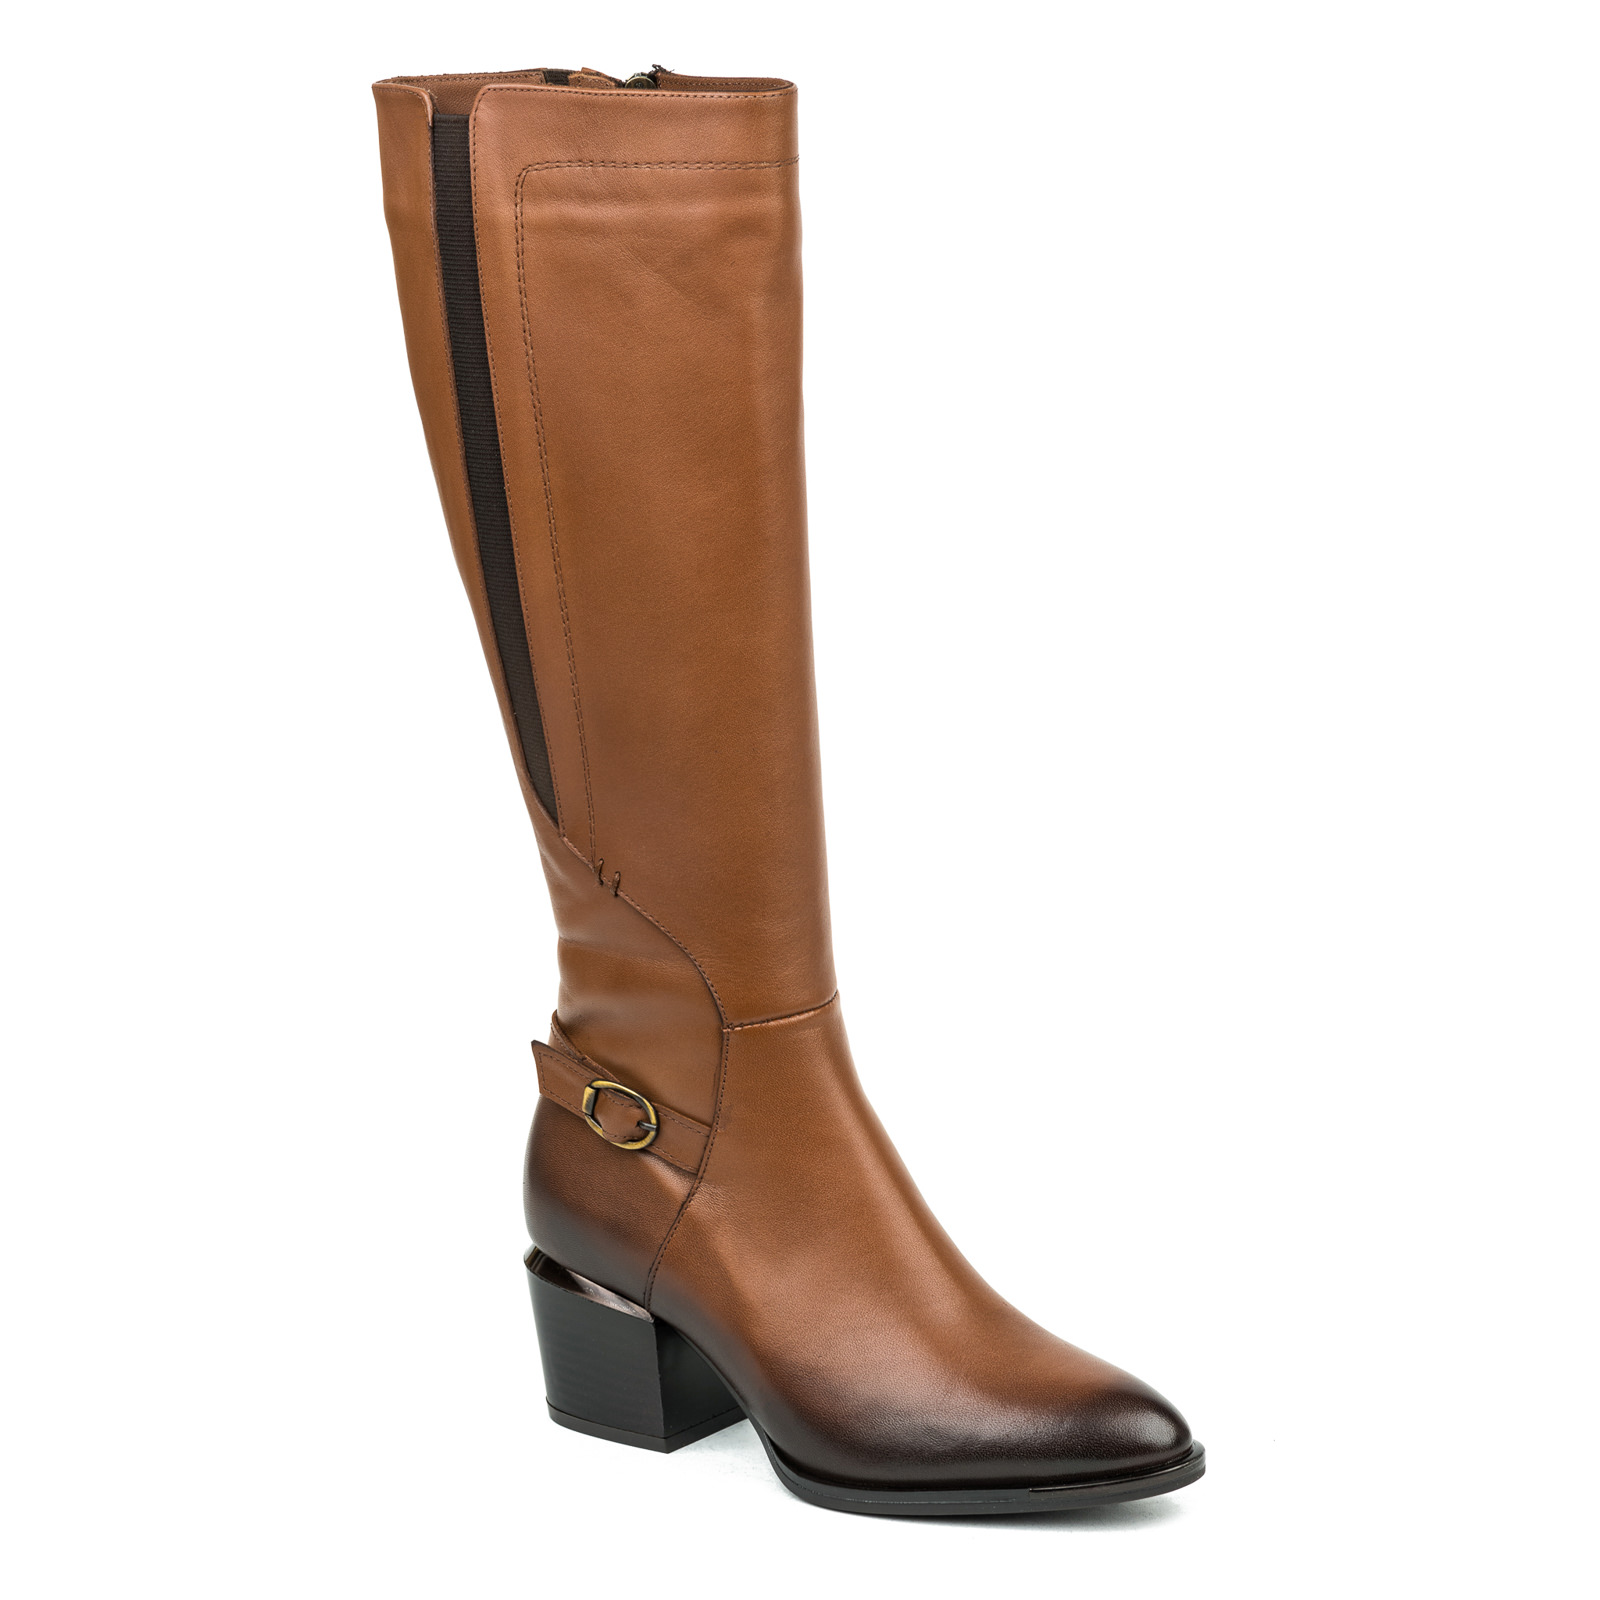 Leather boots B094 - CAMEL